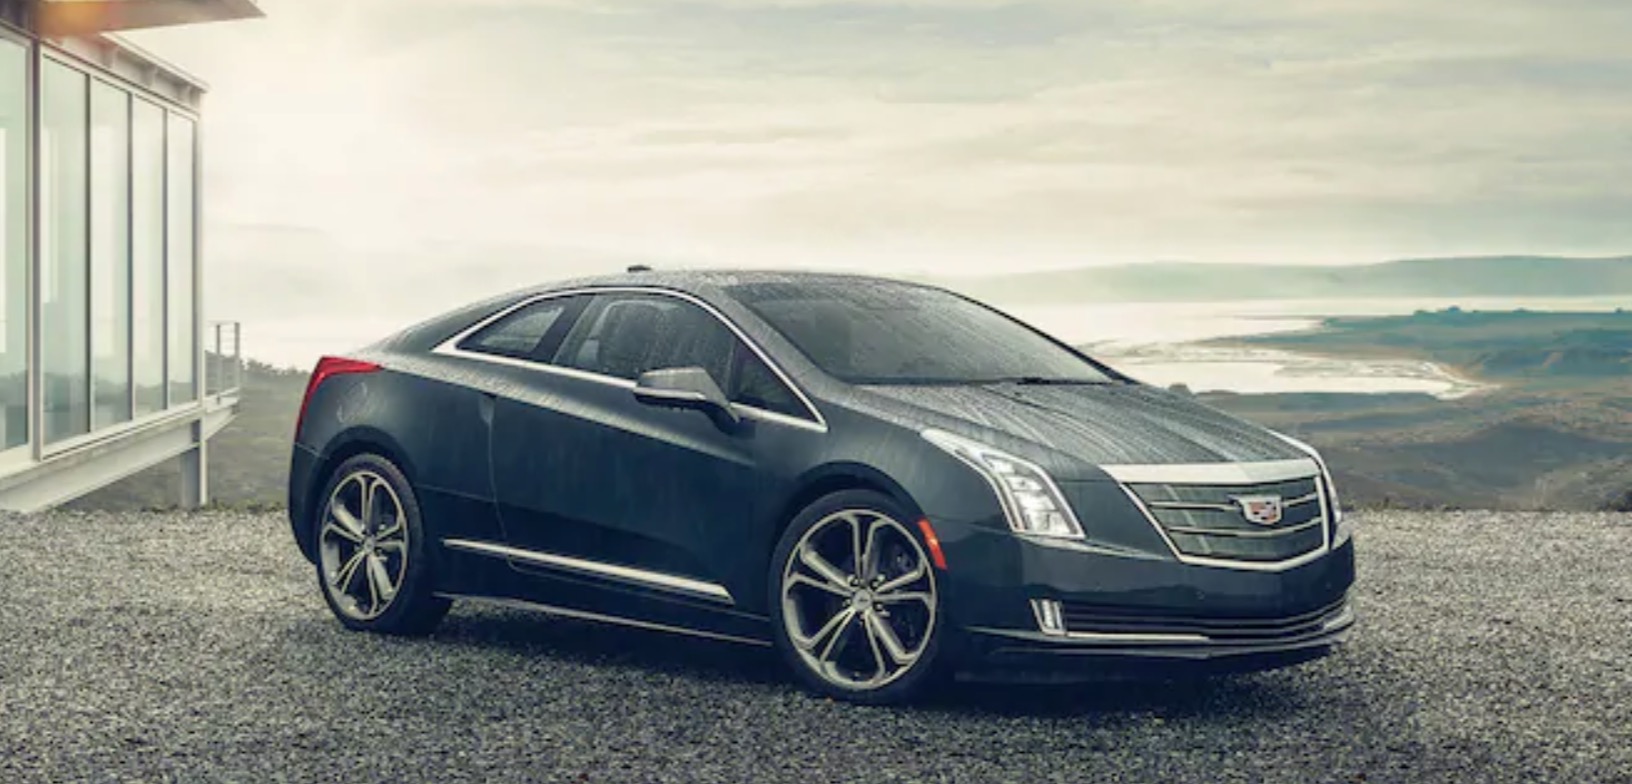 gm cadillac right move focusing cadillac brand electric